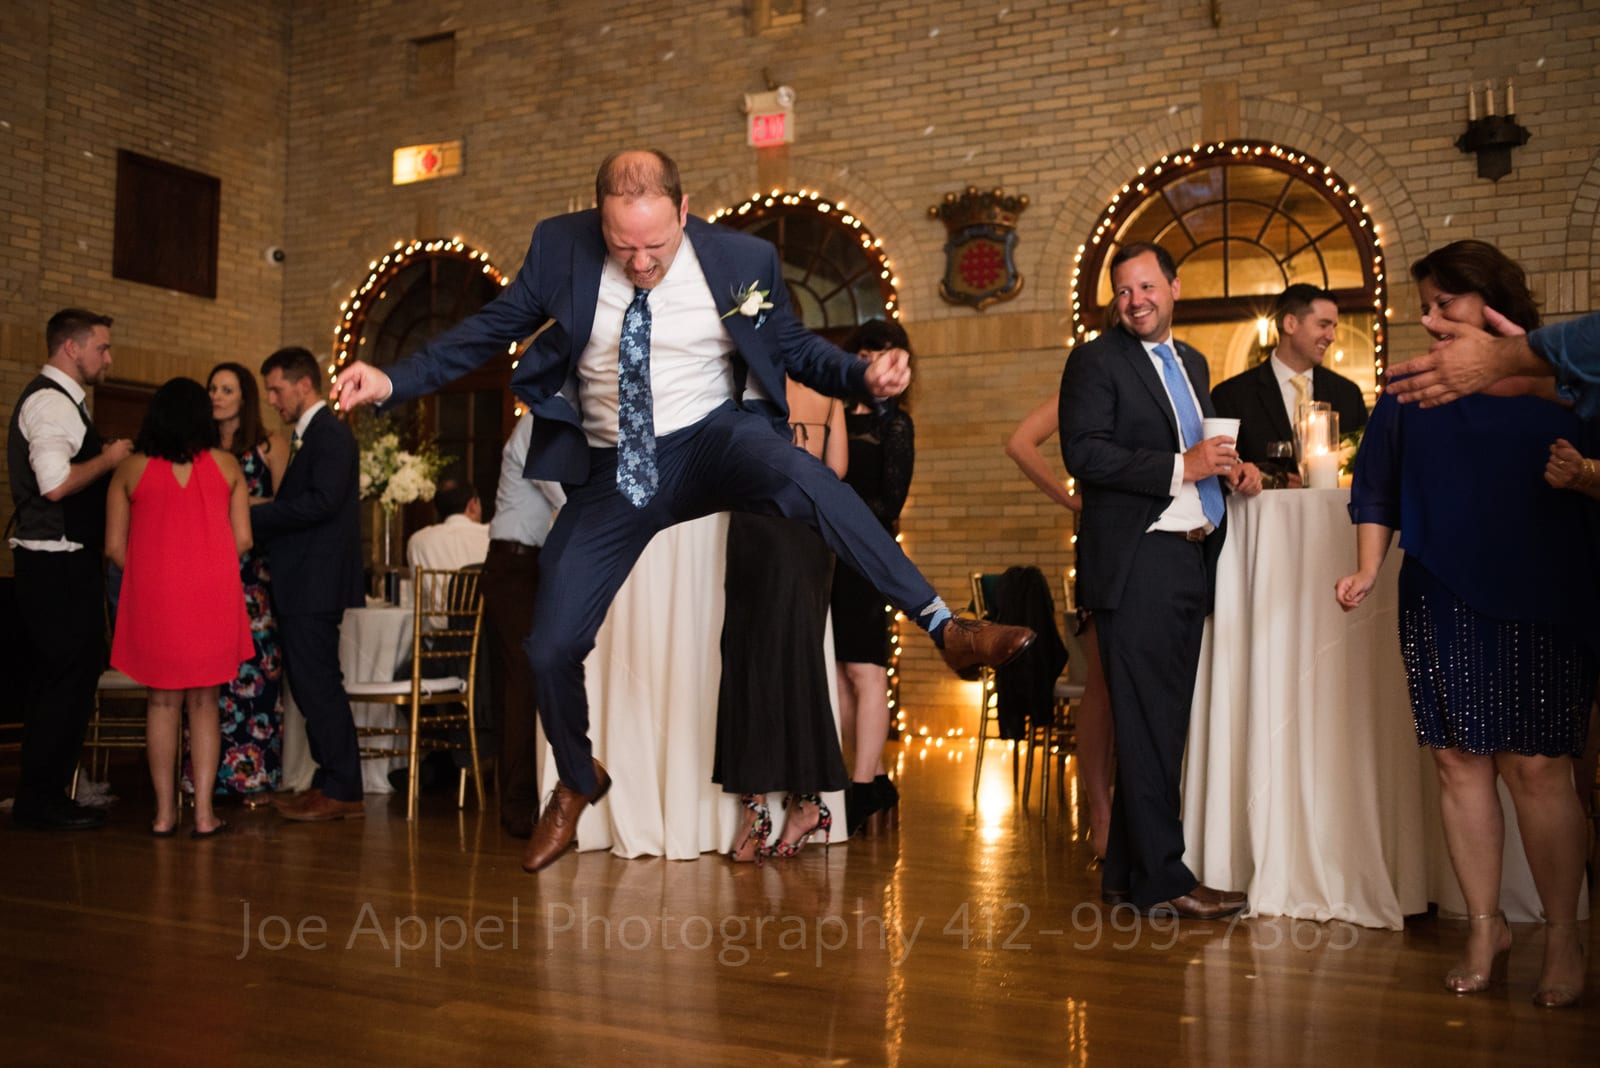 A man in a blue suit leaps into the air while dancing during a St Francis Hall Washington DC wedding.